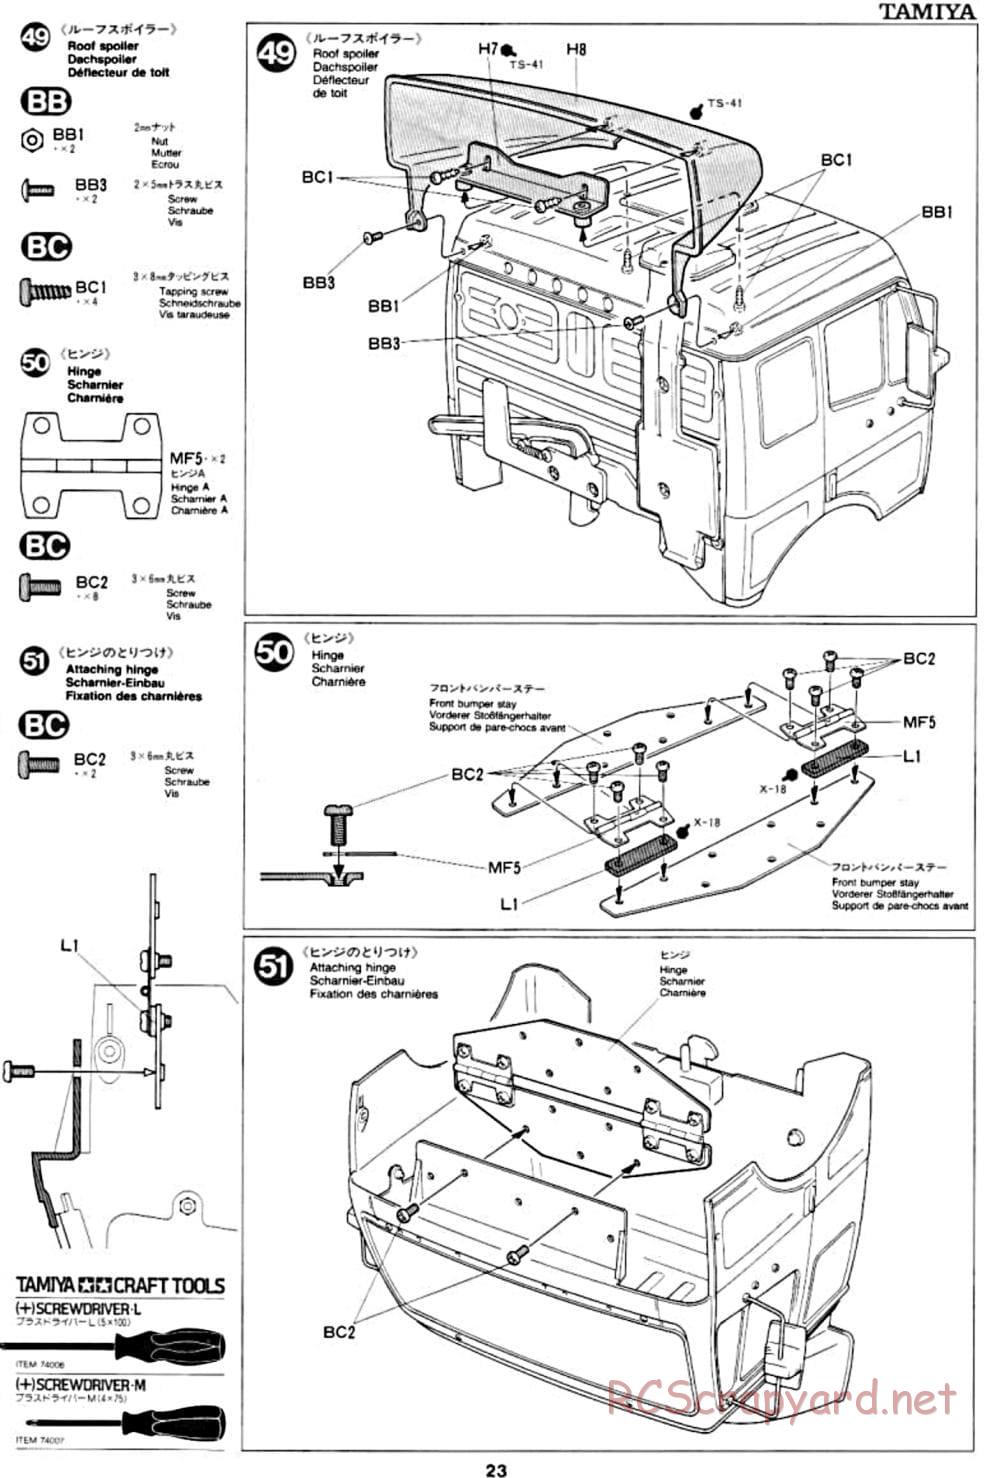 Tamiya - Mercedes-Benz 1850L Delivery Truck - Manual - Page 23